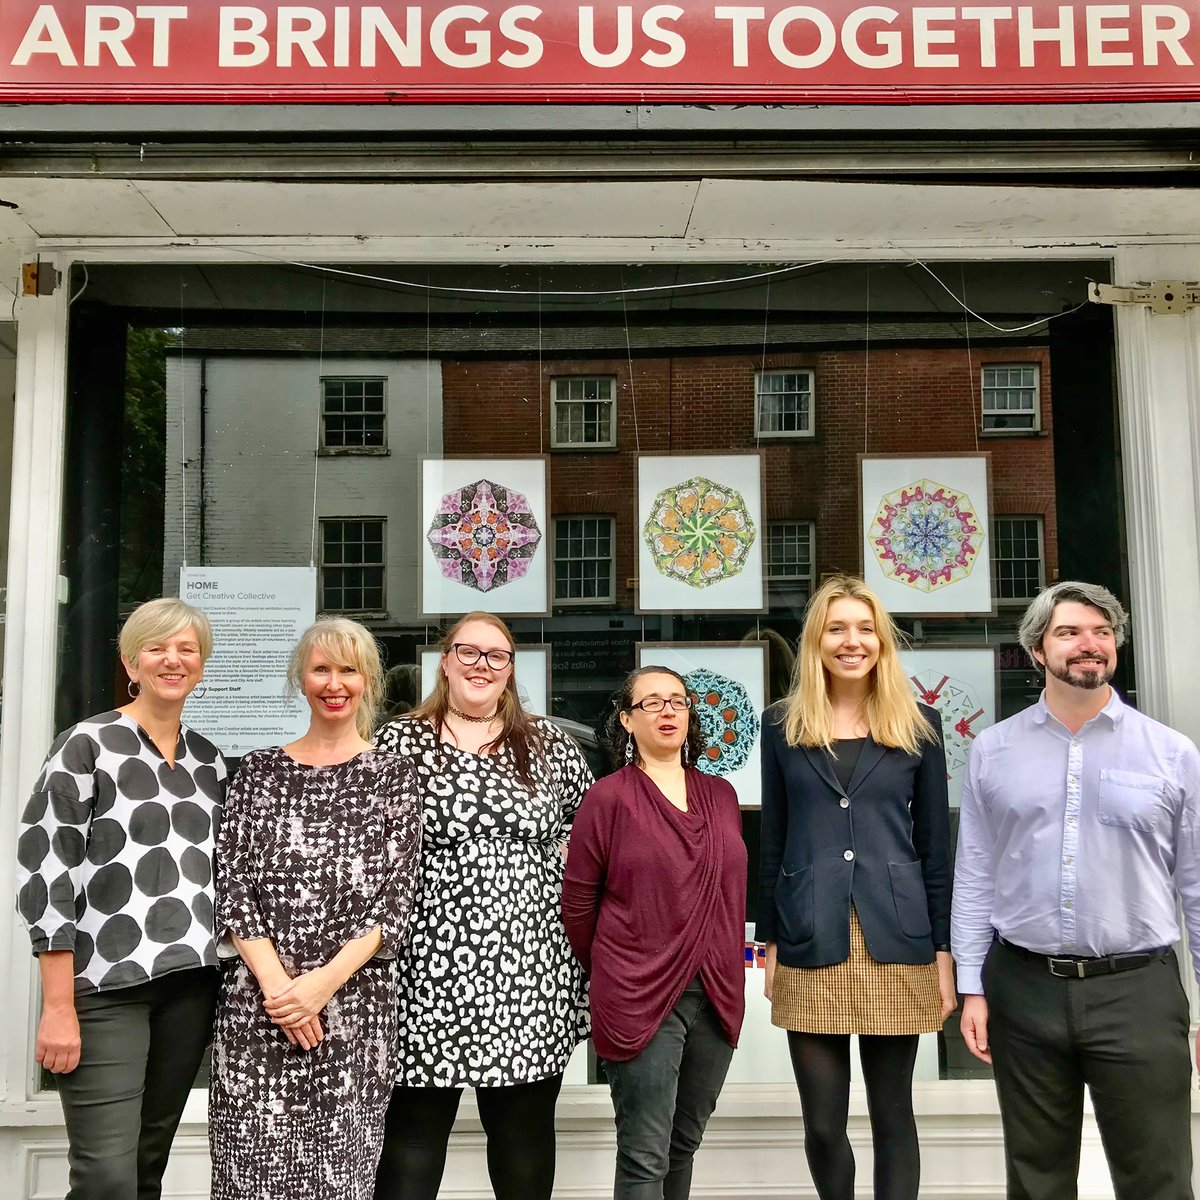 Thanks to those who joined us at the launch of 'Home' - our new exhibition by members of our Get Creative group. Including @liliangreenwood, Cllr Sam Lux & @CllrMattShannon. Get Creative supports artists who have learning disabilities or mental health issues.